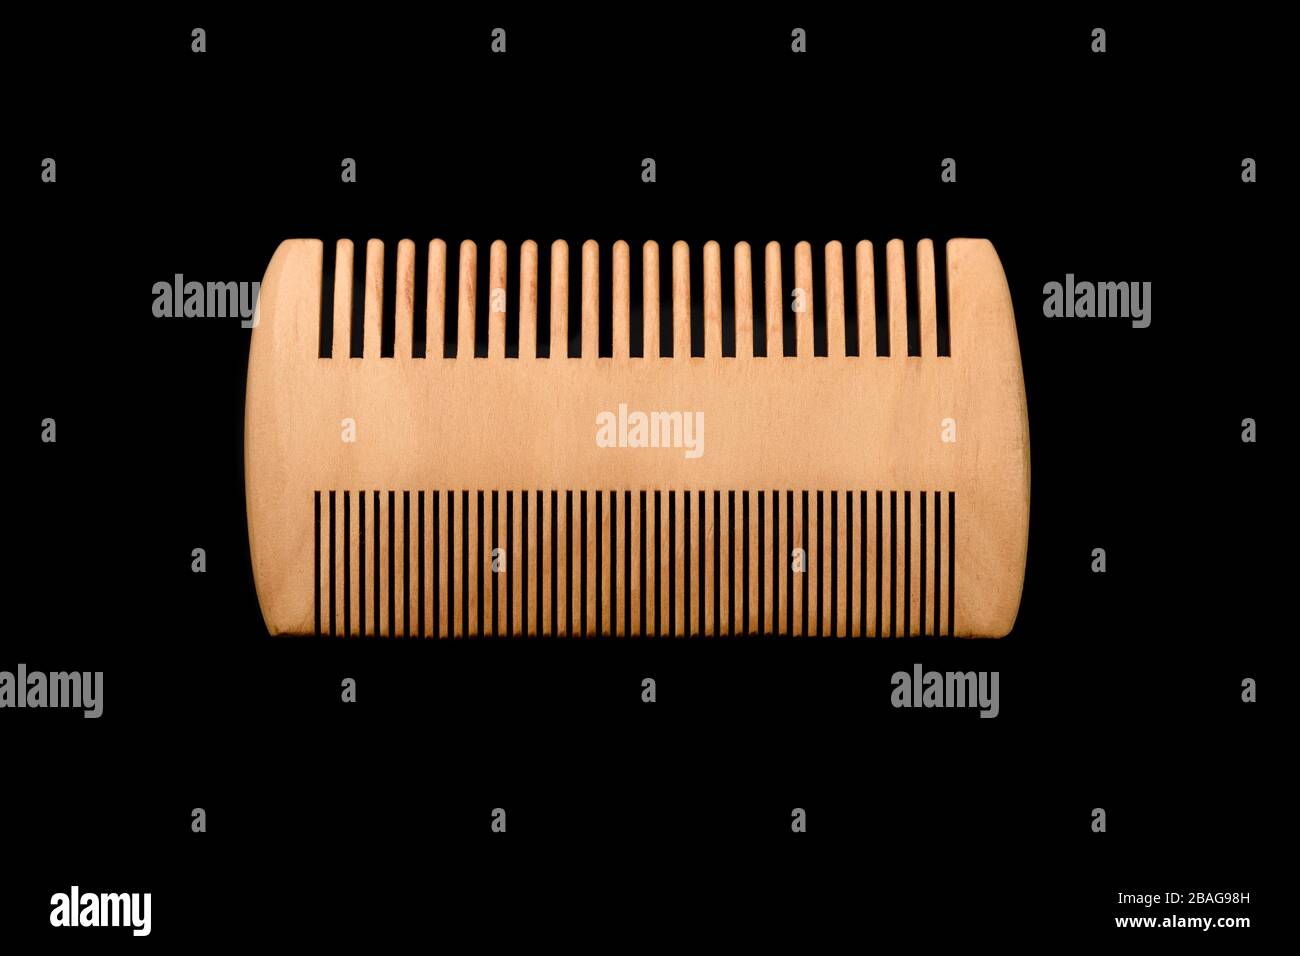 Wooden beard comb isolated on black background. Stock Photo